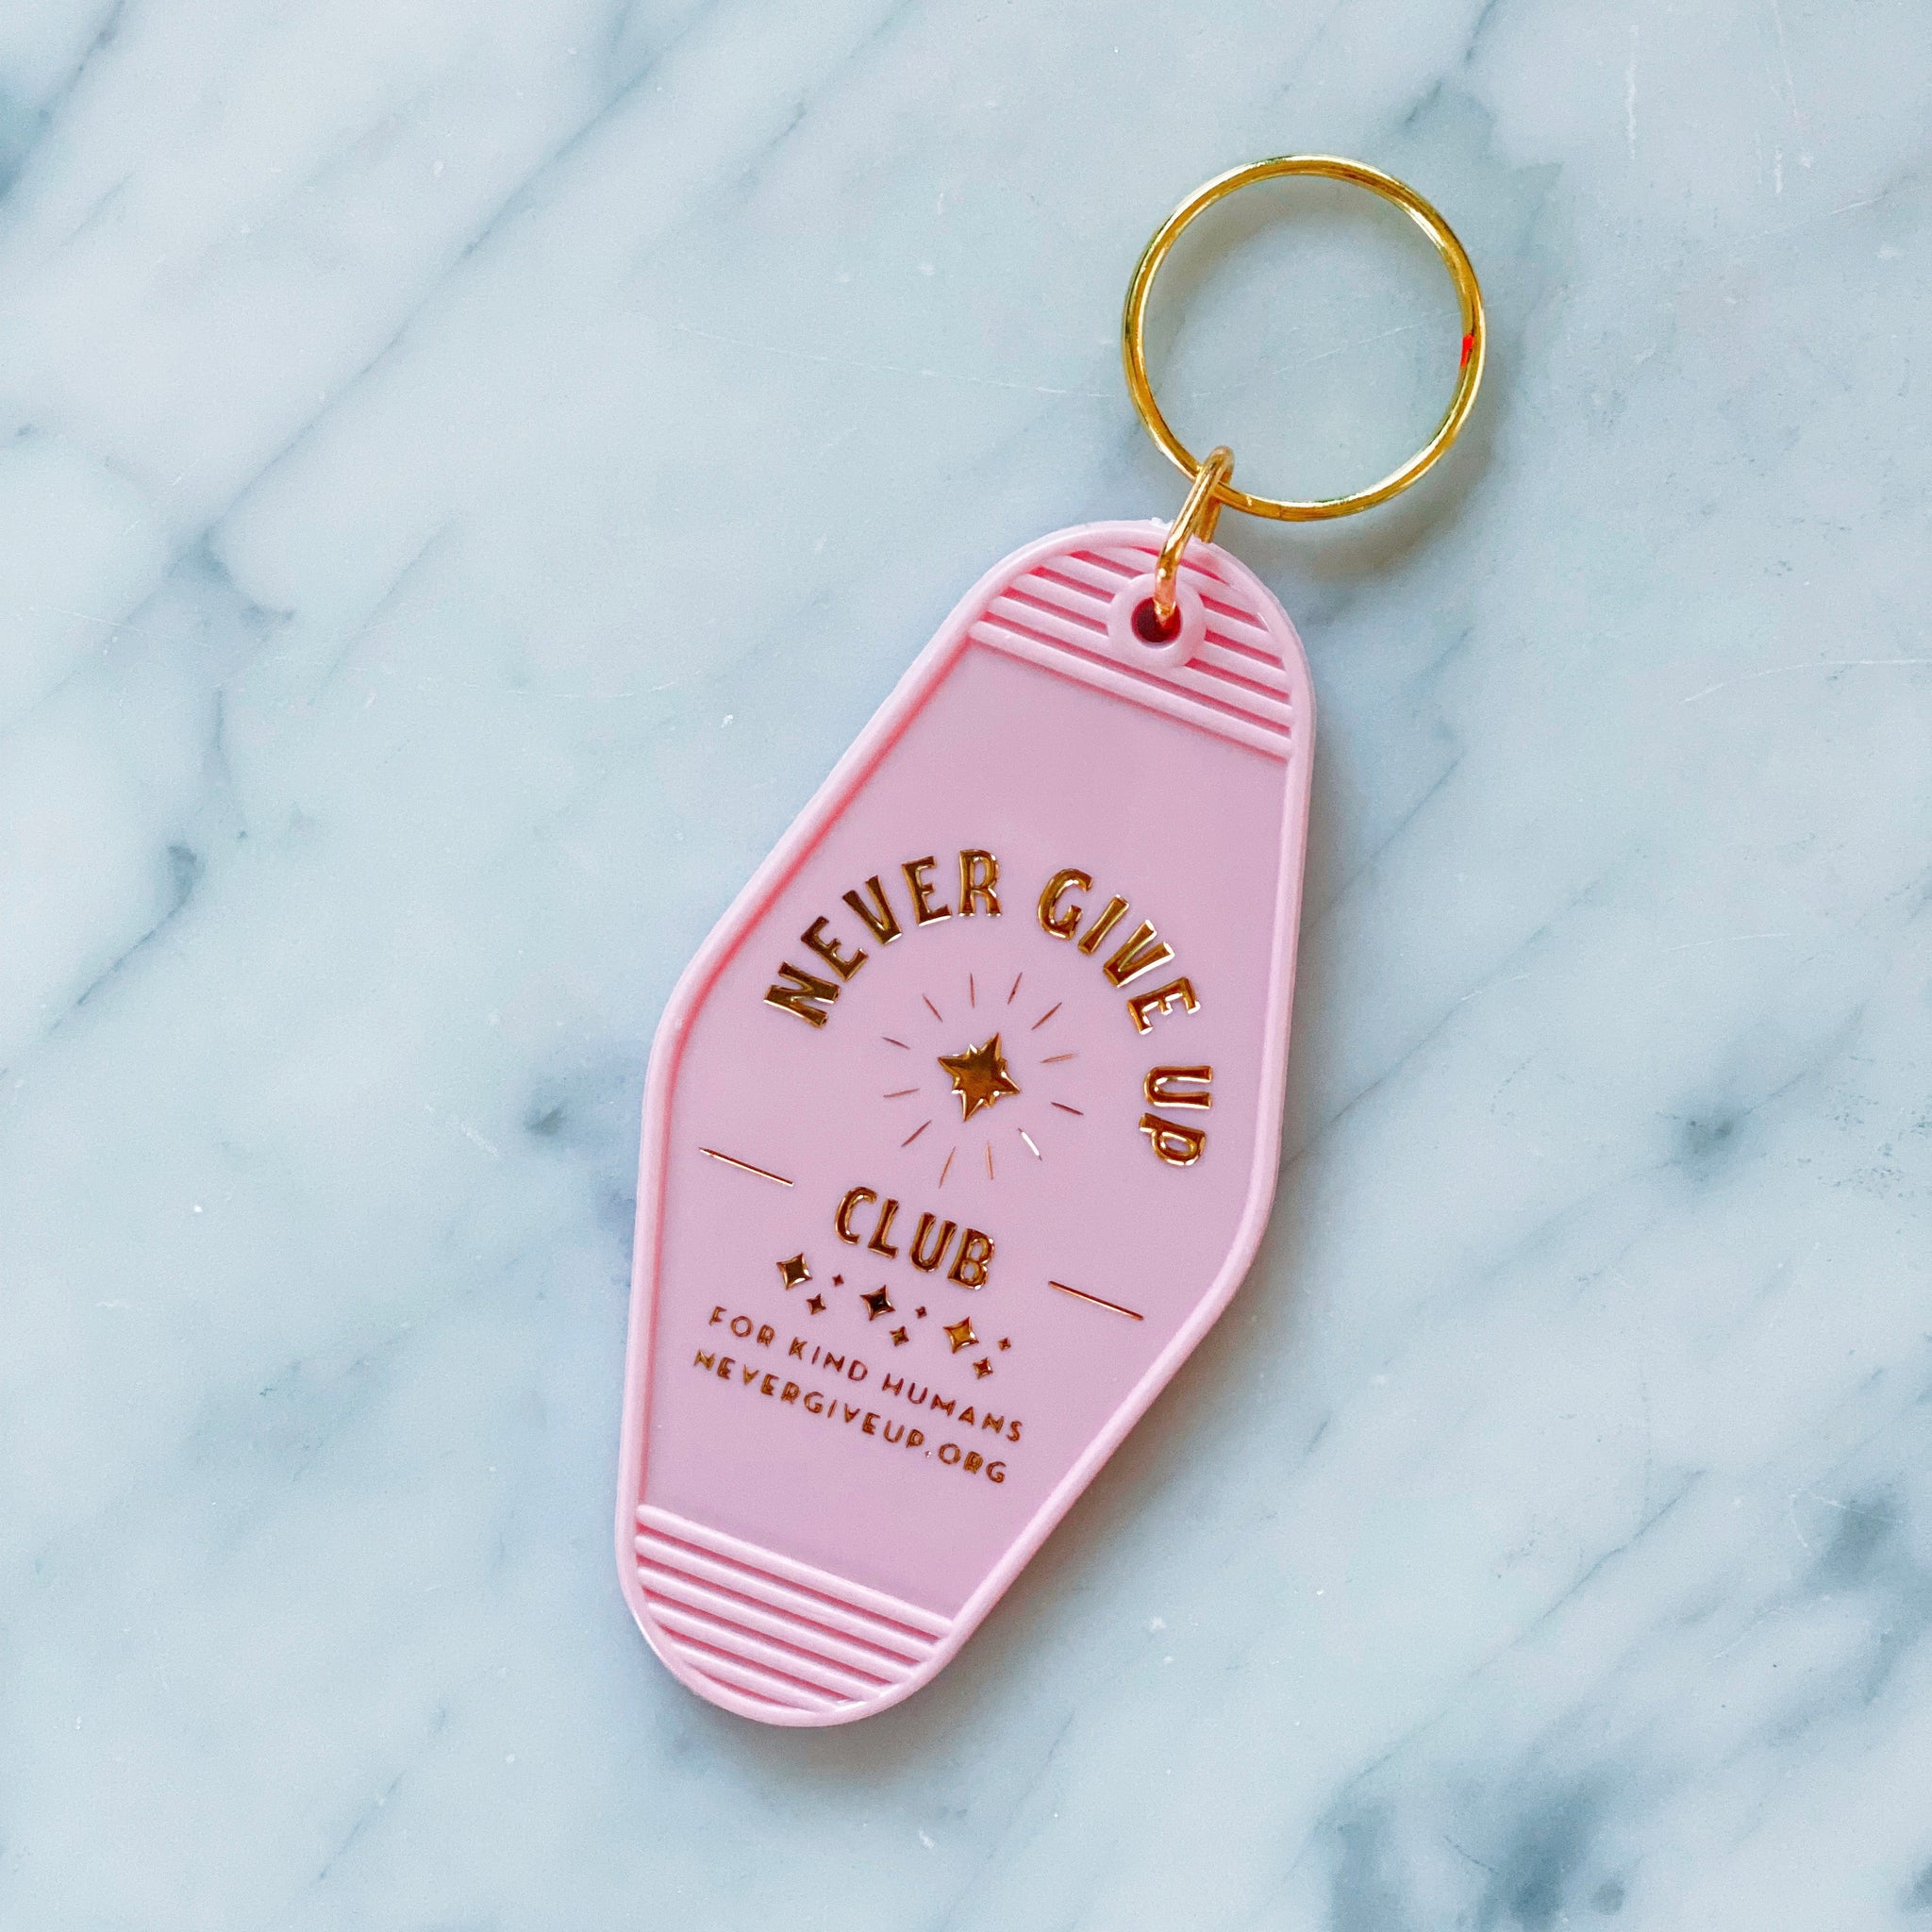 MOTEL KEY CHAIN - NEVER GIVE UP CLUB